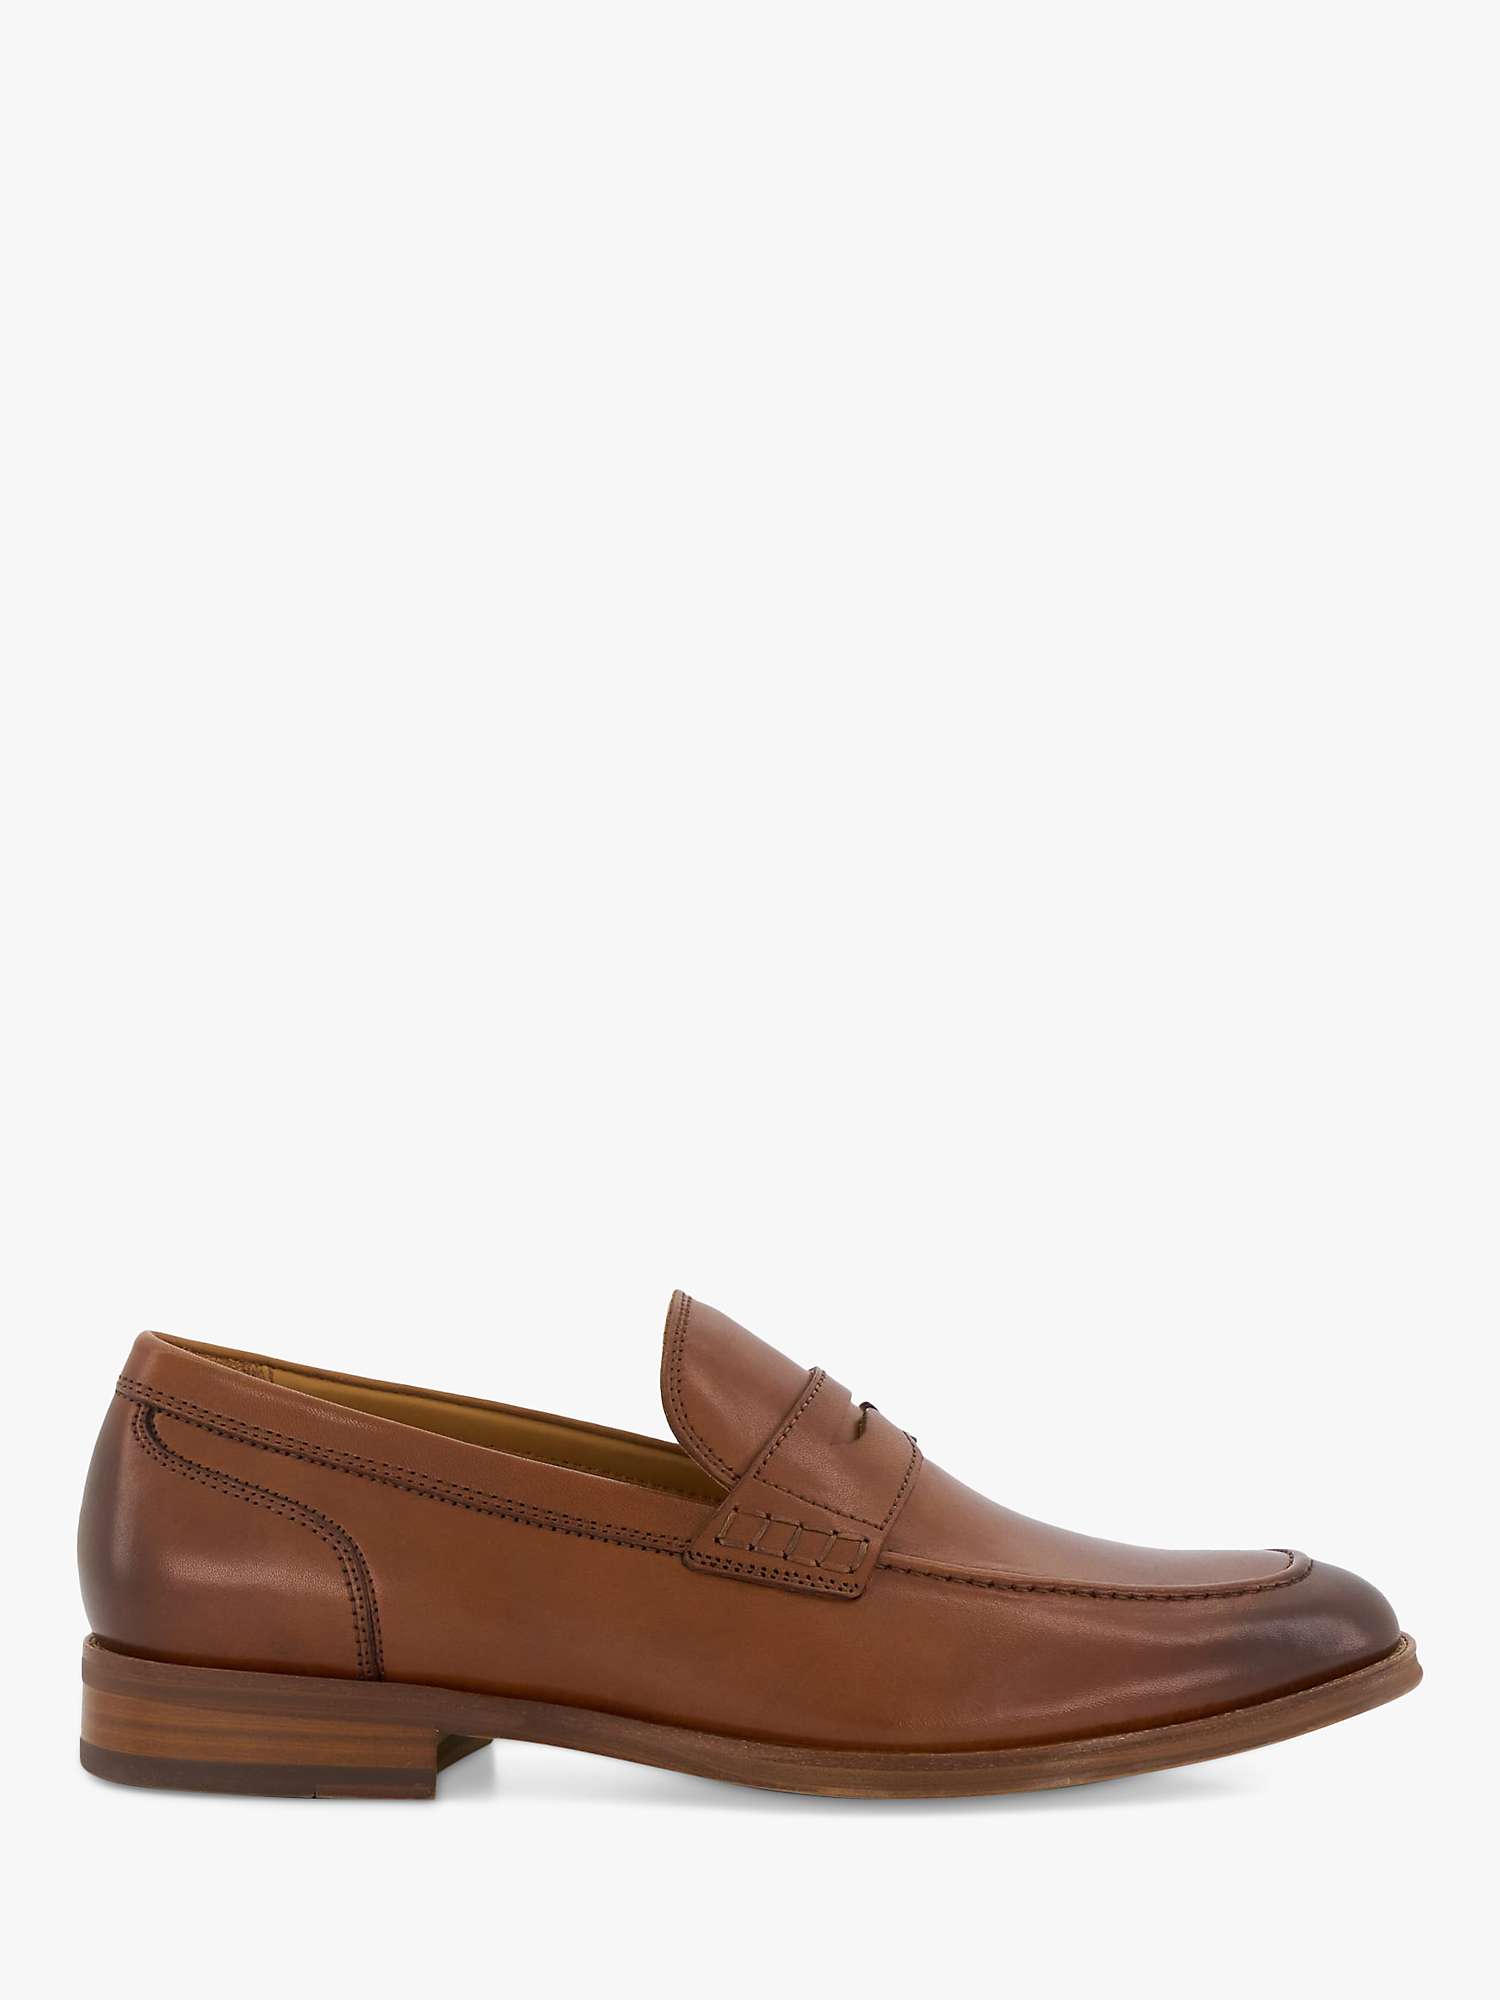 Buy Dune Sulli Leather Moccasin Shoes, Tan Online at johnlewis.com